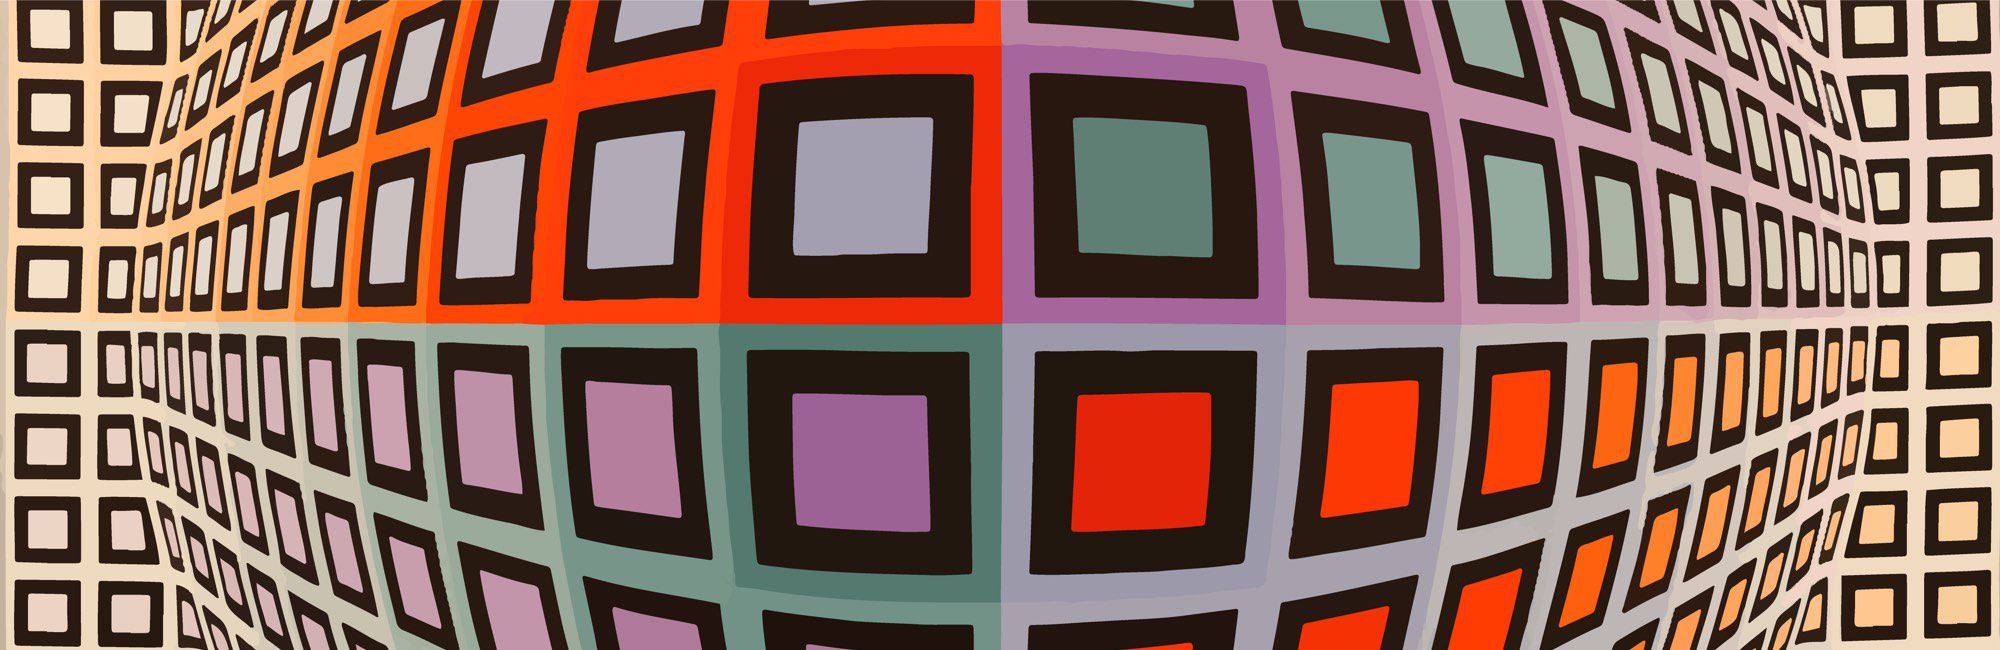 Foundation of Victor Vasarely accuses London gallery of selling works by  the Op artist that it doesn't own